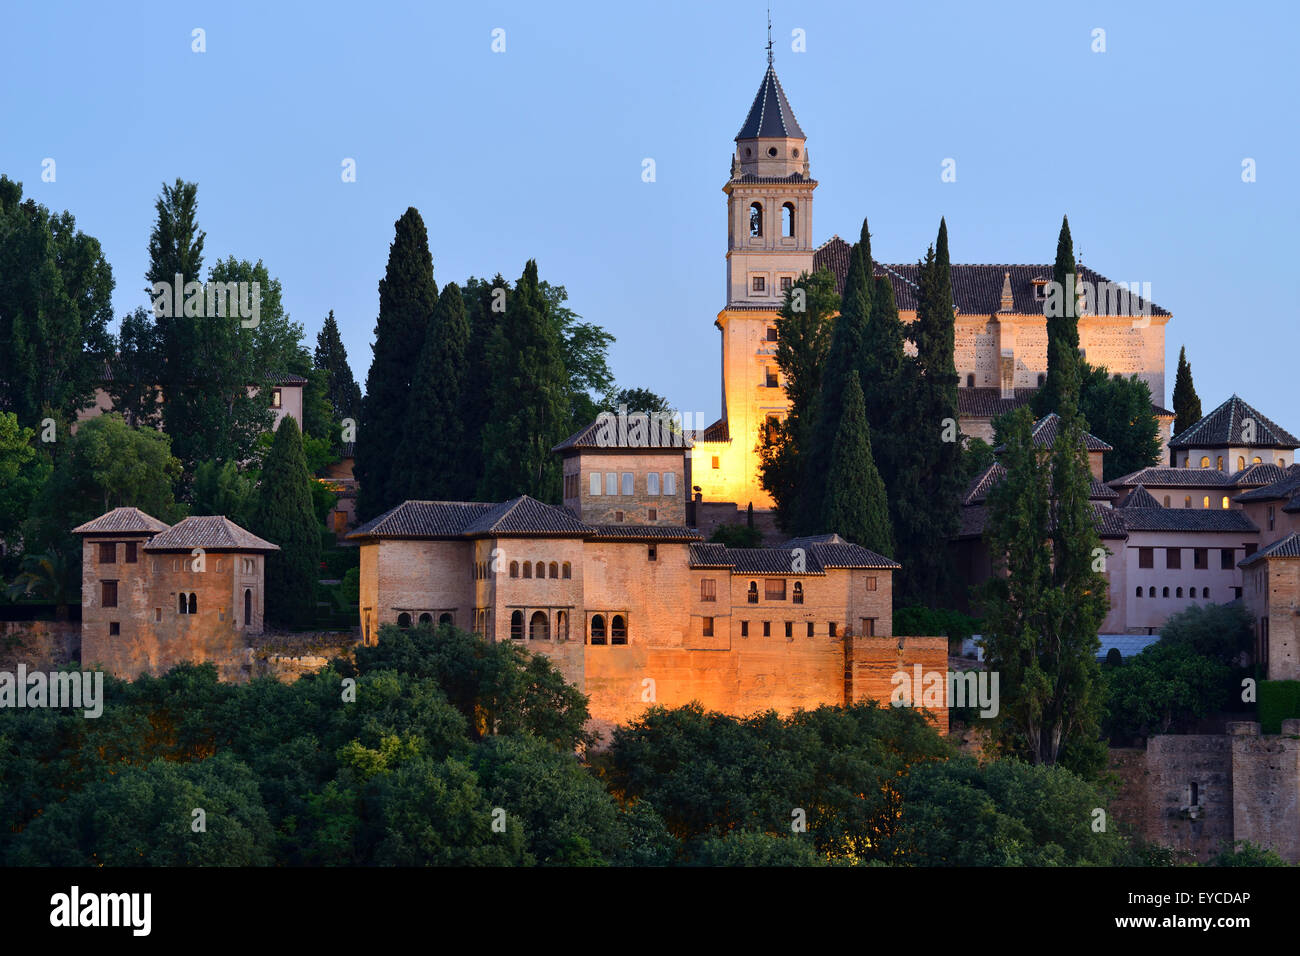 View of  Iglesia de Santa María at dusk within the Alhambra Palace complex in Granada, Andalusia, Spain Stock Photo